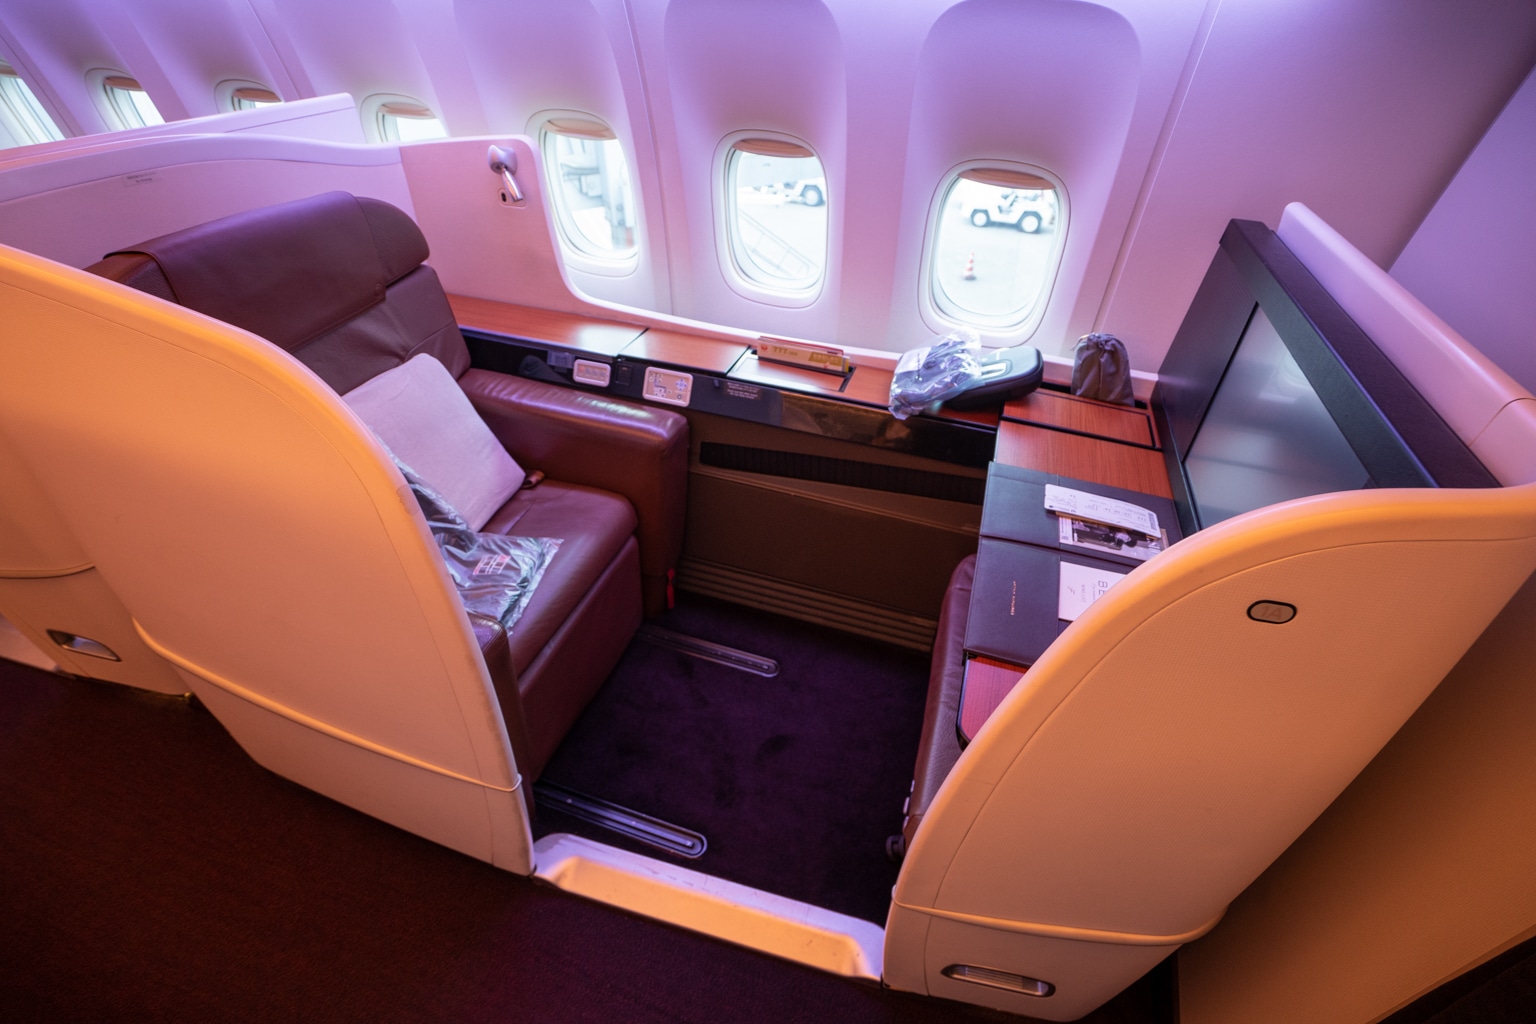 These first class flight seats are as decadent as it gets